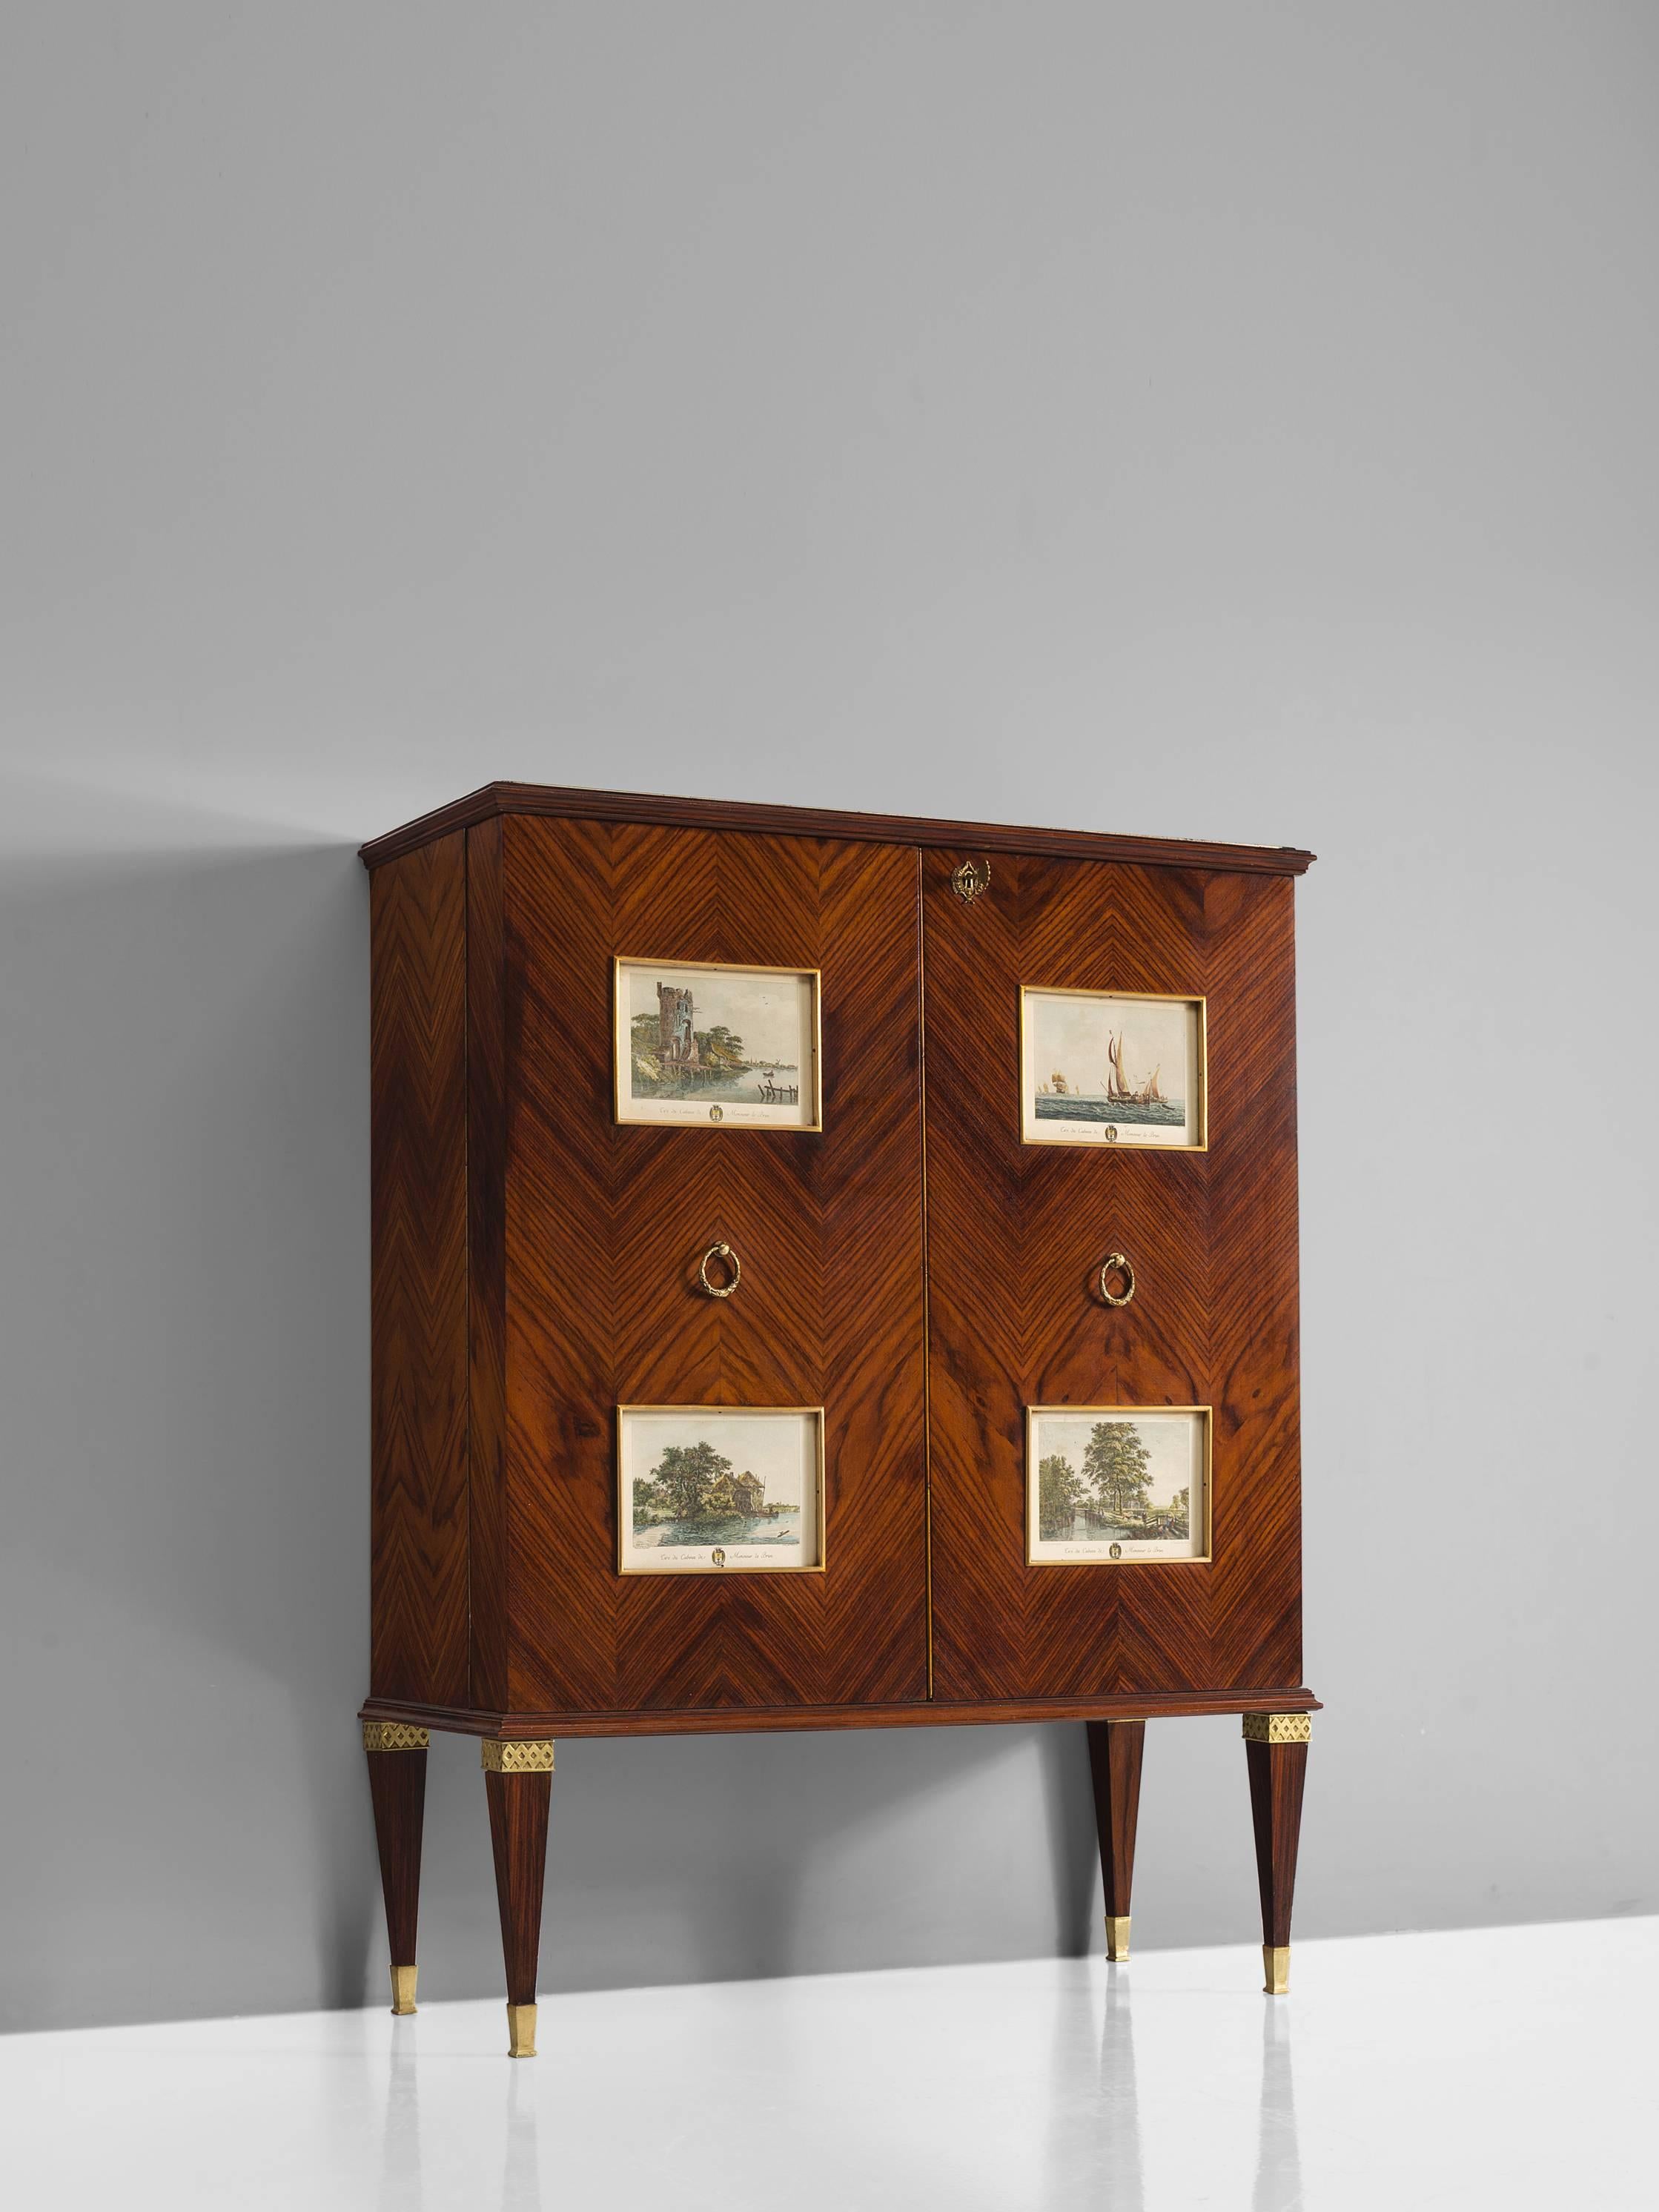 Paolo Buffa, dry bar cabinet, in rosewood, brass and glass, Italy, 1940s. 

This large liquor cabinet by Paulo Buffa is part of the midcentury design collection. The rosewood veneered bar features herringbone illuminated prominent doors which are